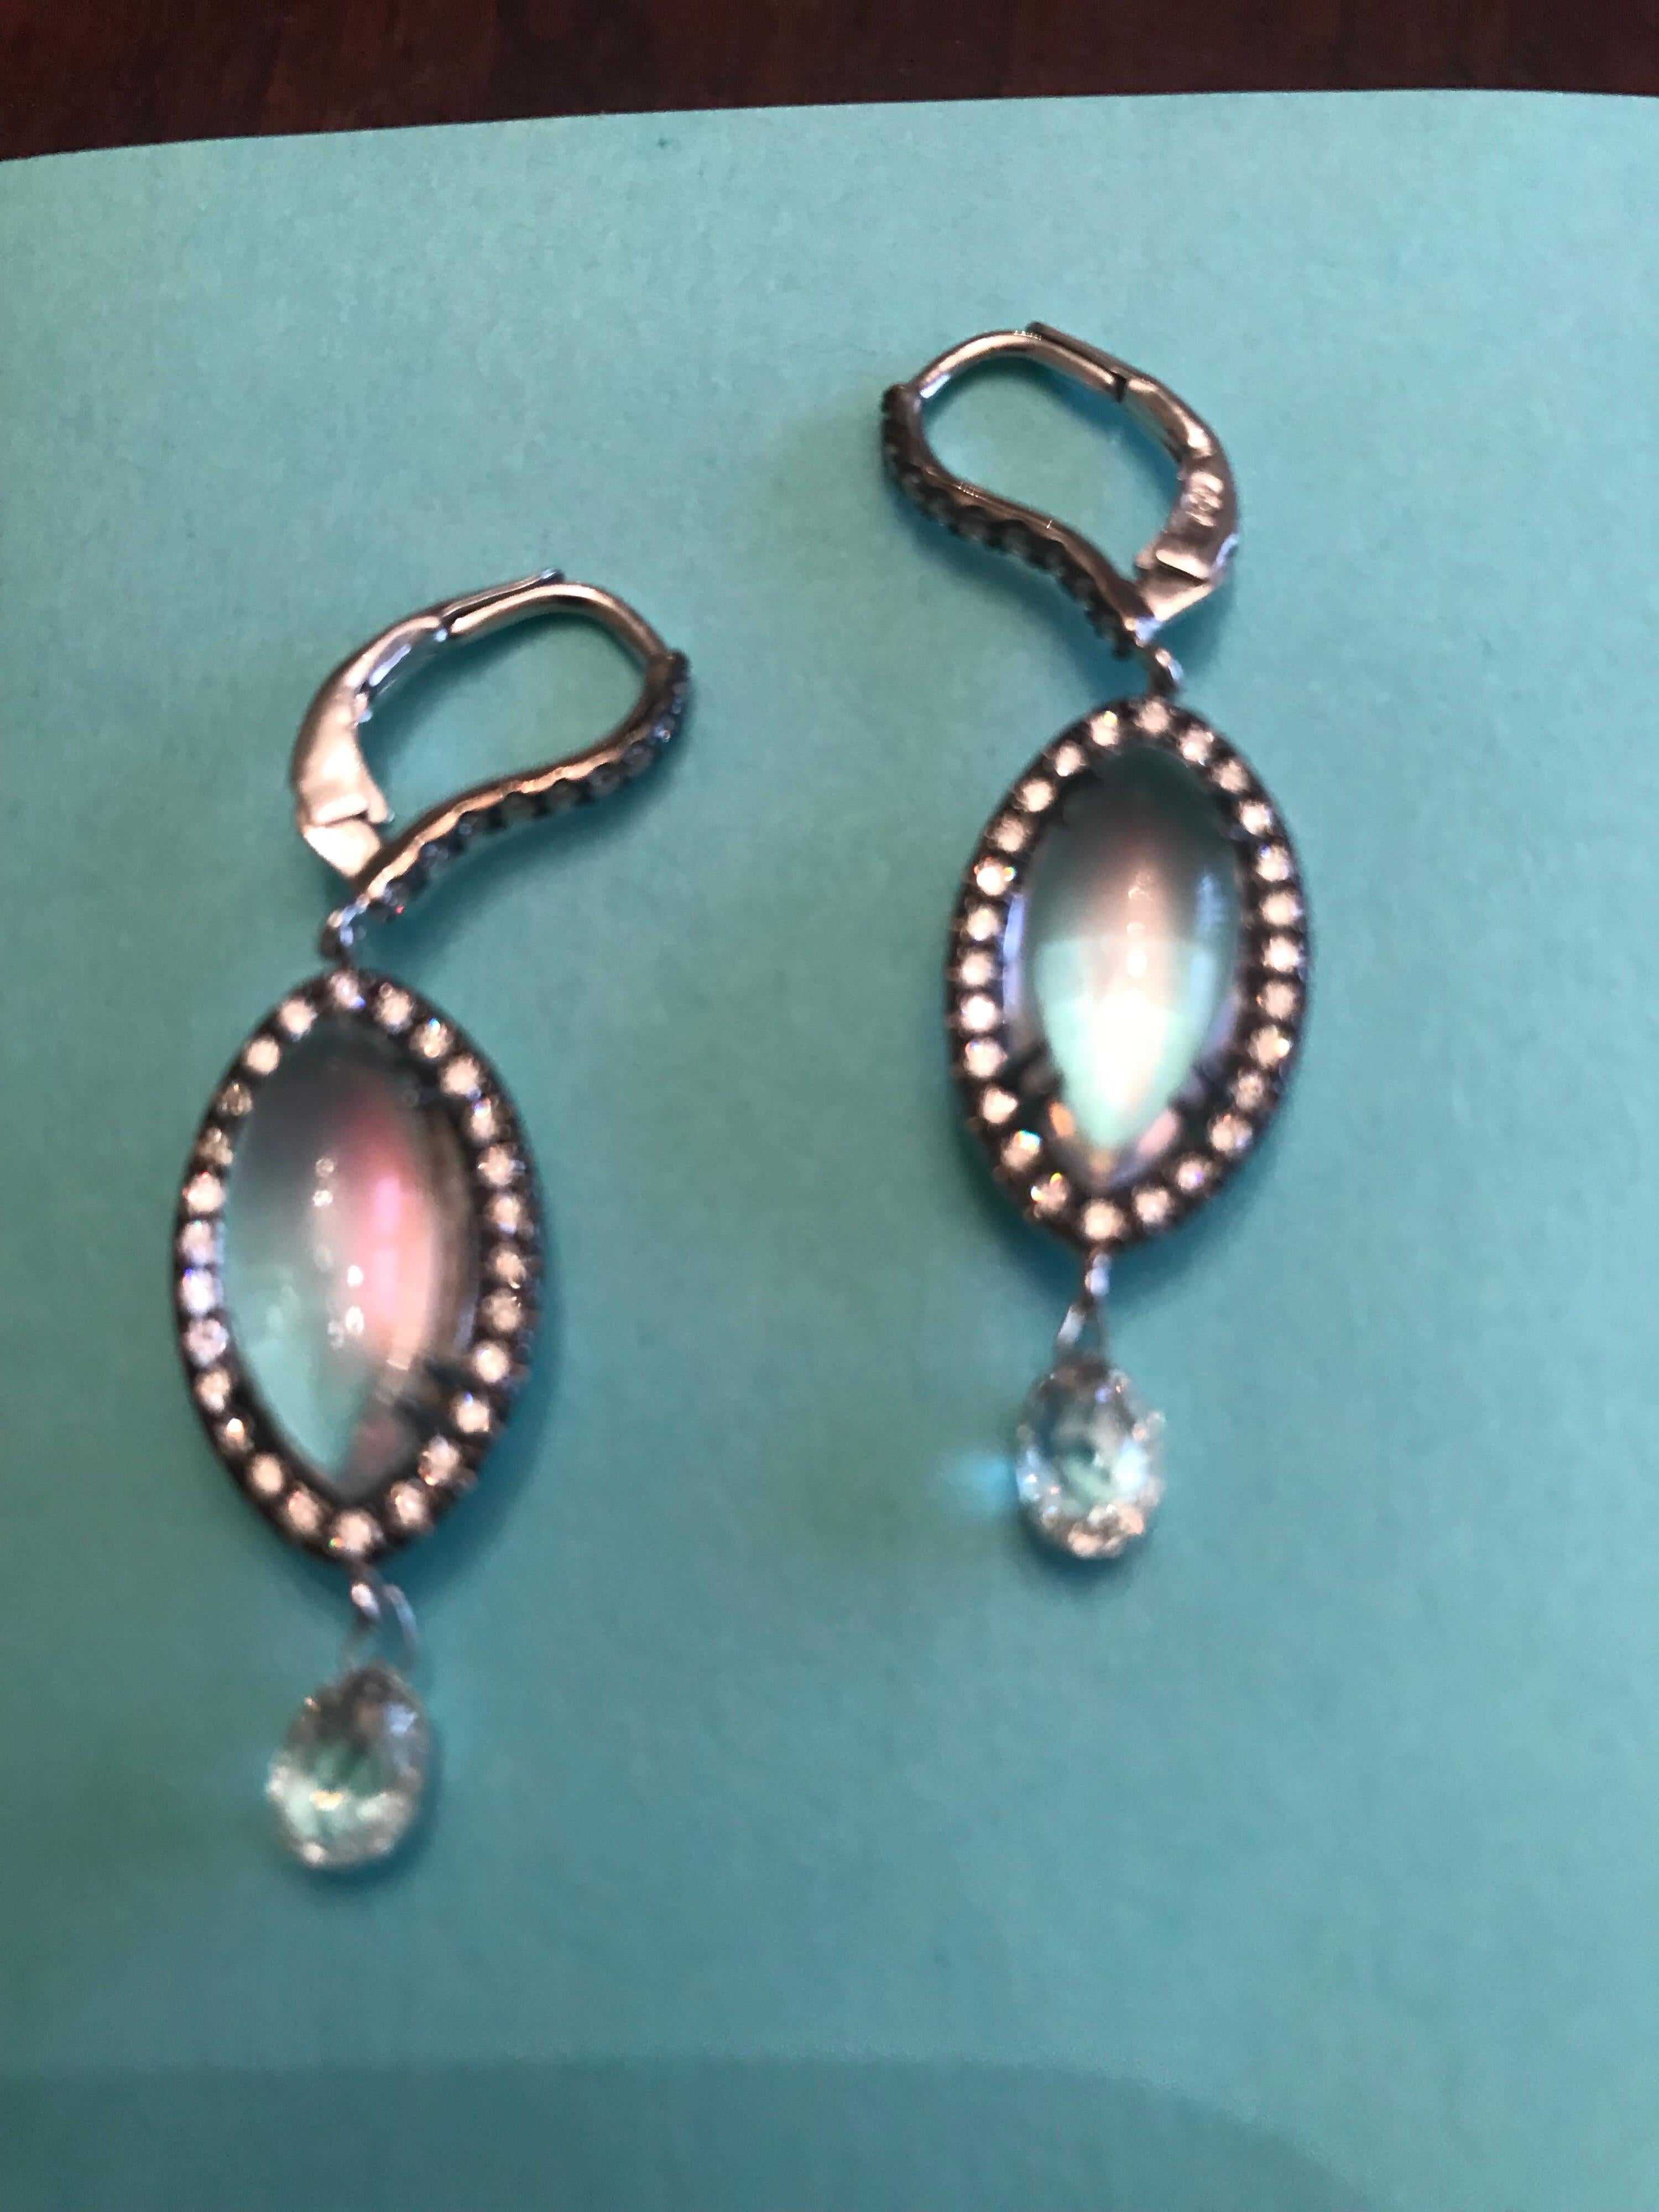 Bella Campbells/Campbellian Collection New The Rainbow Moonstone Earrings With Diamond Accent: The Elegant Marquise Shape Moonstone Are From Africa, The Stones Showing Strong Orange SheenAs A Primary Color, The Secondary Colors AreYellow, Gold,